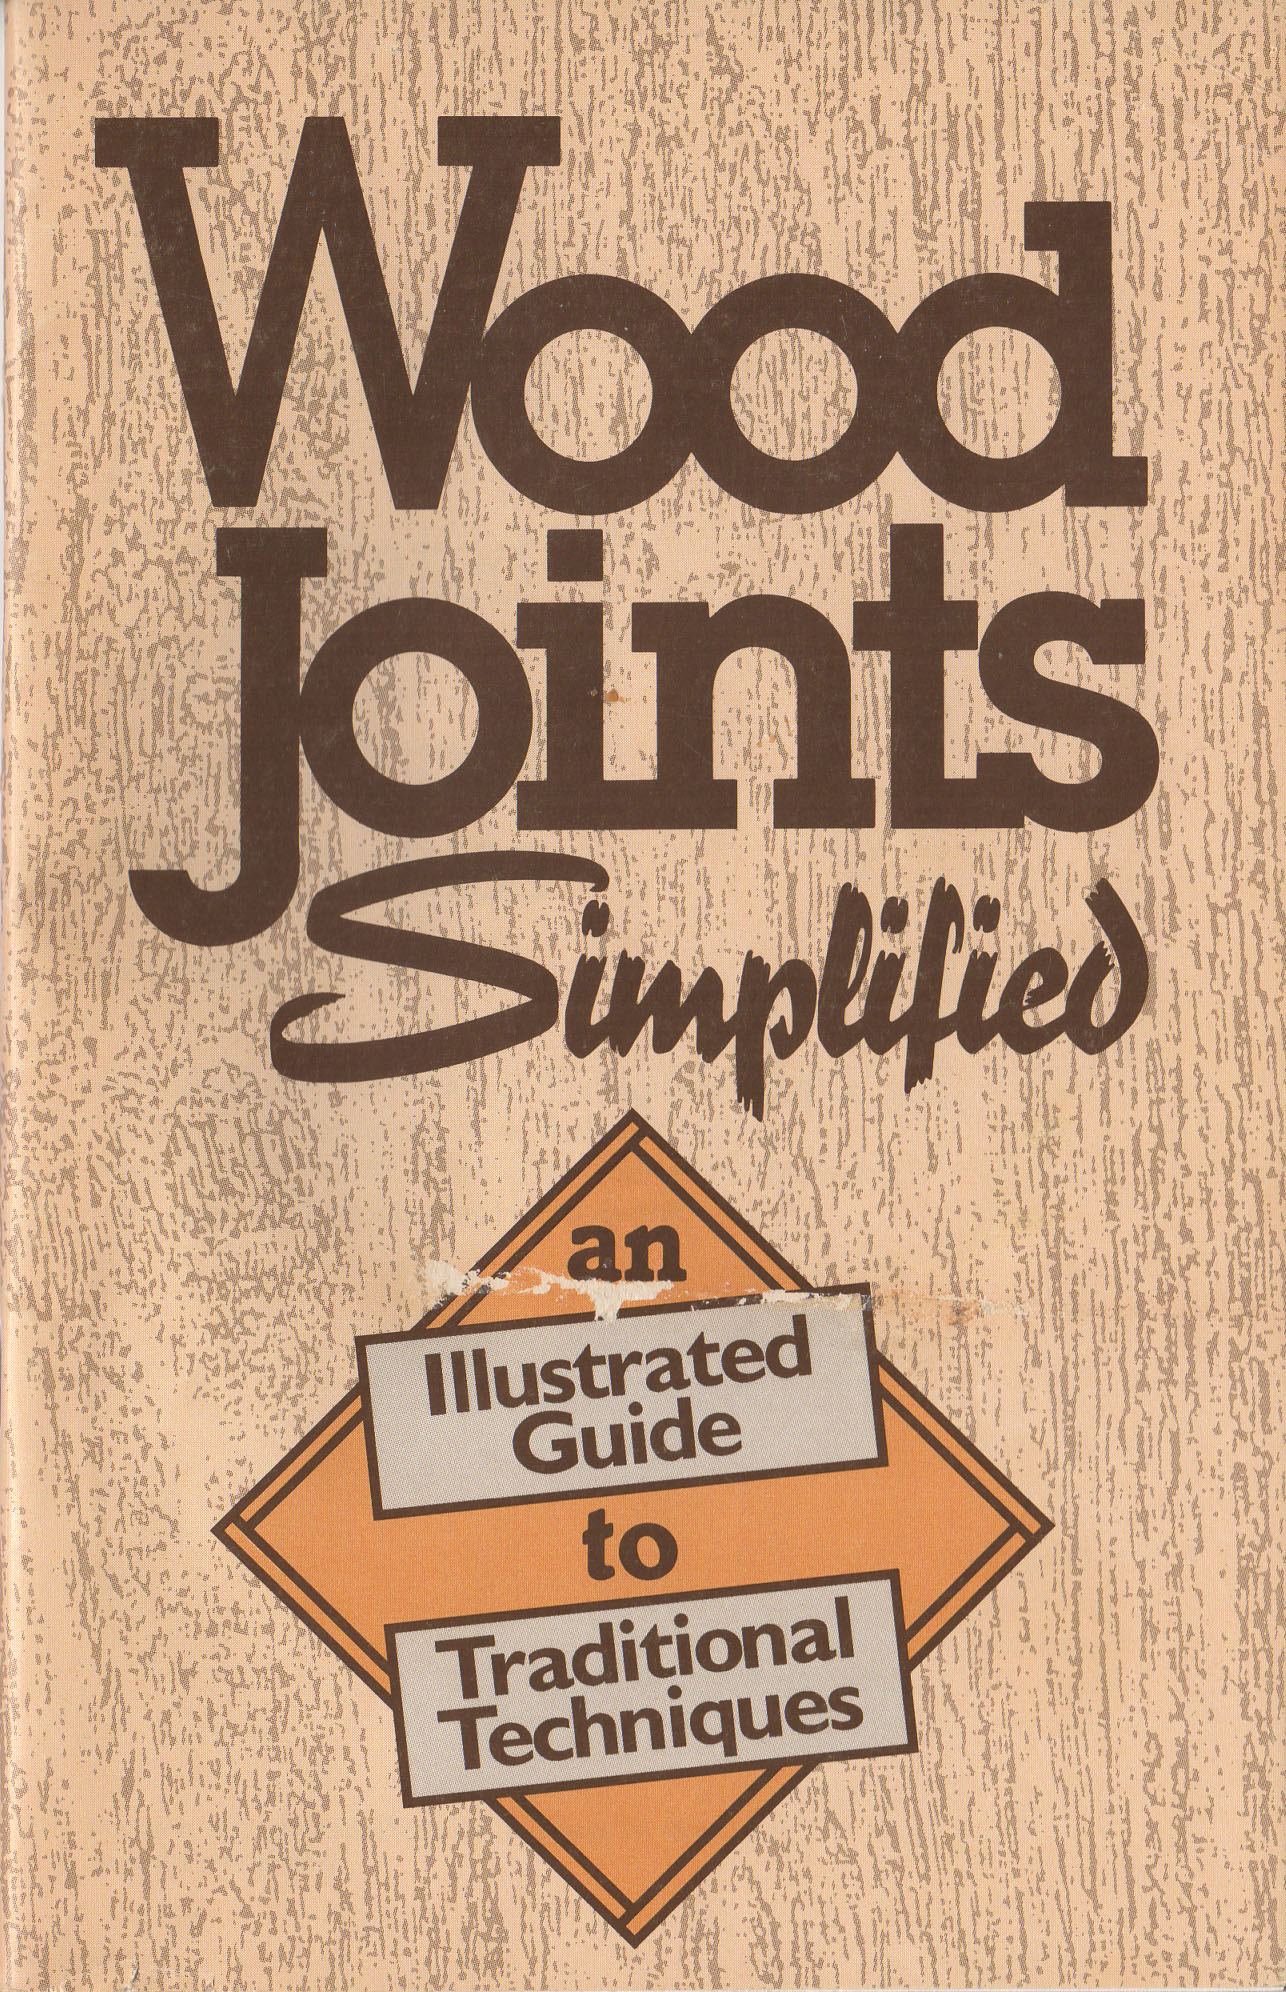 WOOD JOINTS SIMPLIFIED: An Illustrated Guide - Charles H 